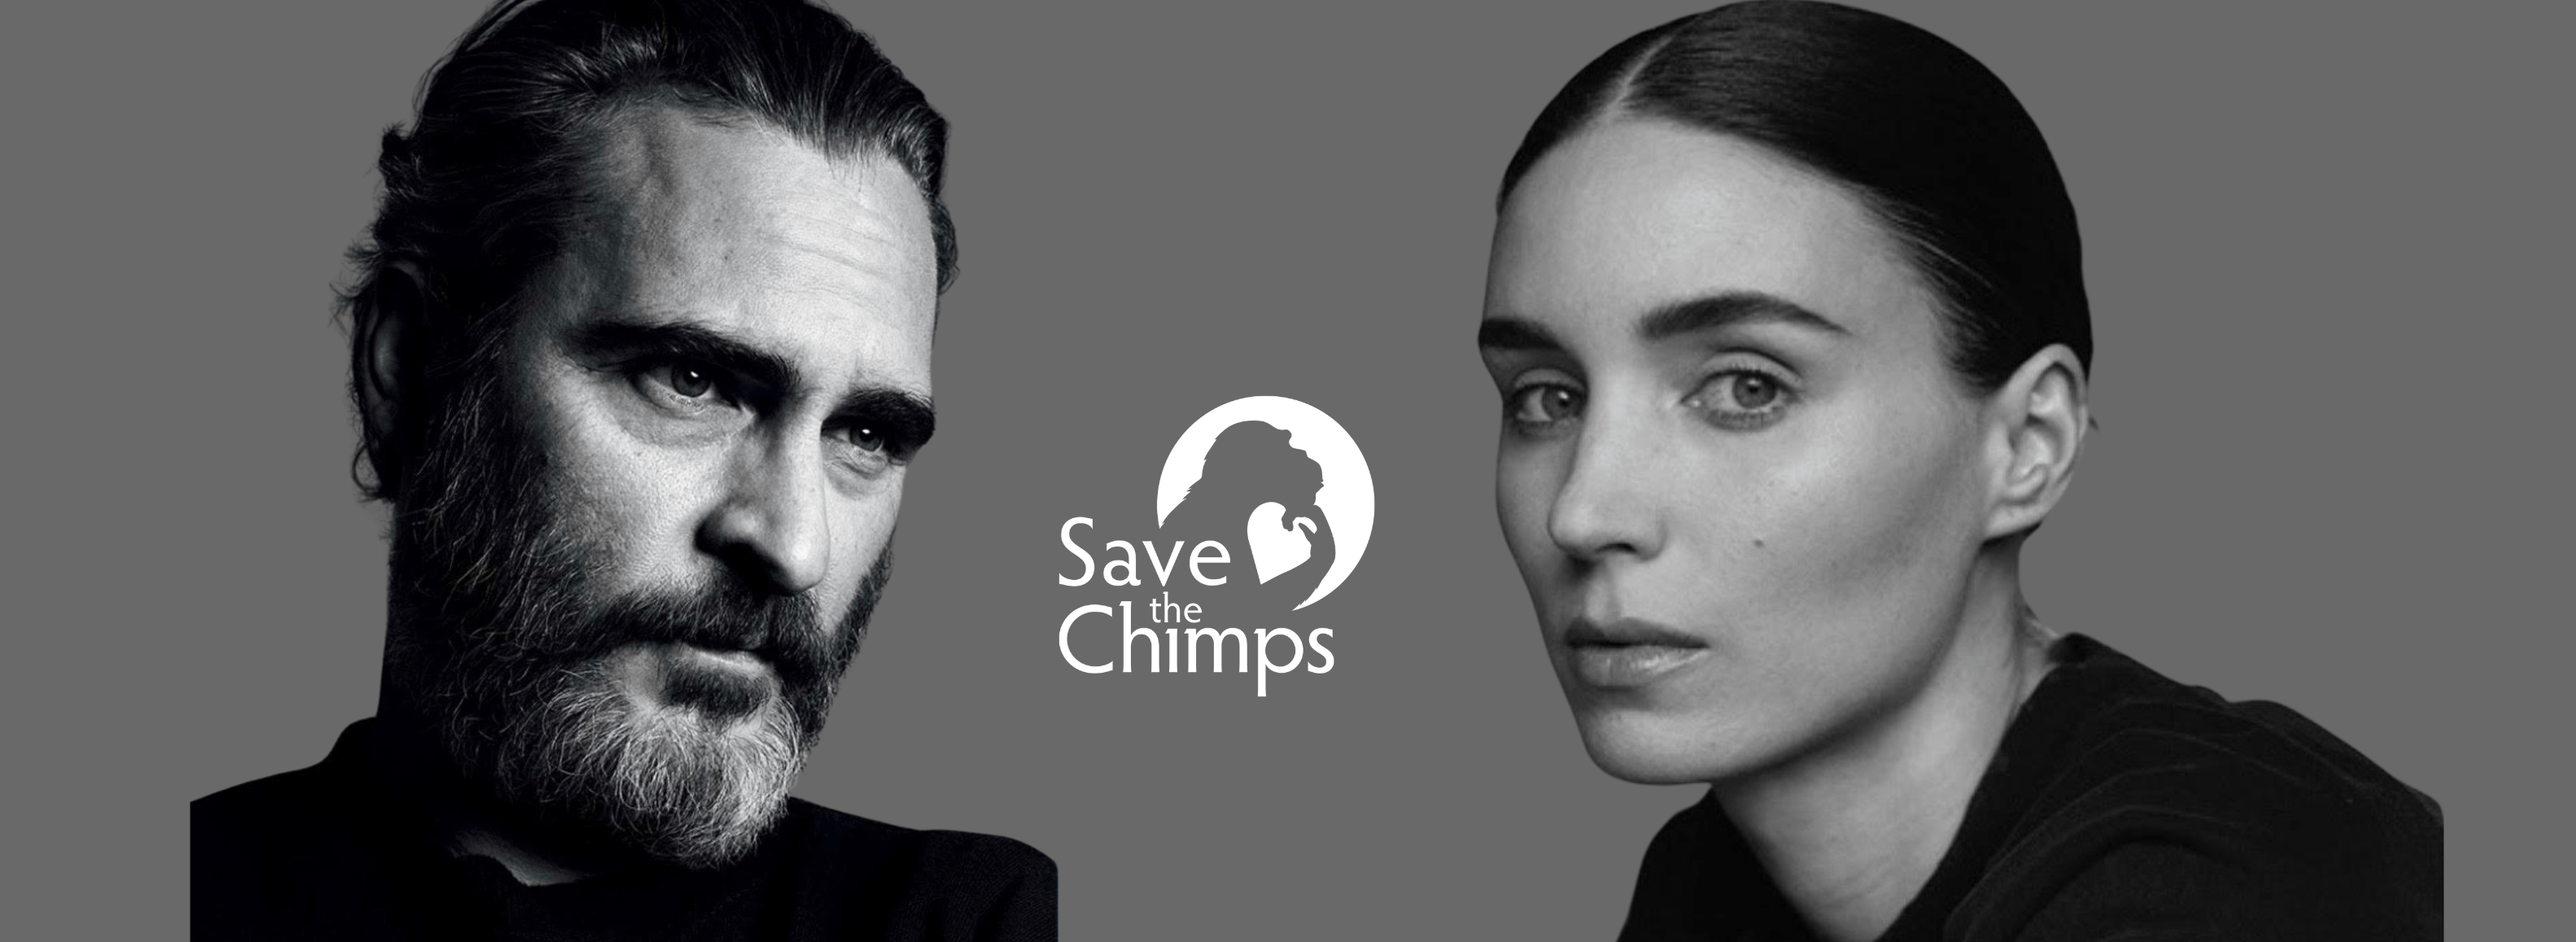 The Joaquin Phoenix & Rooney Mara Save the Chimps Collection